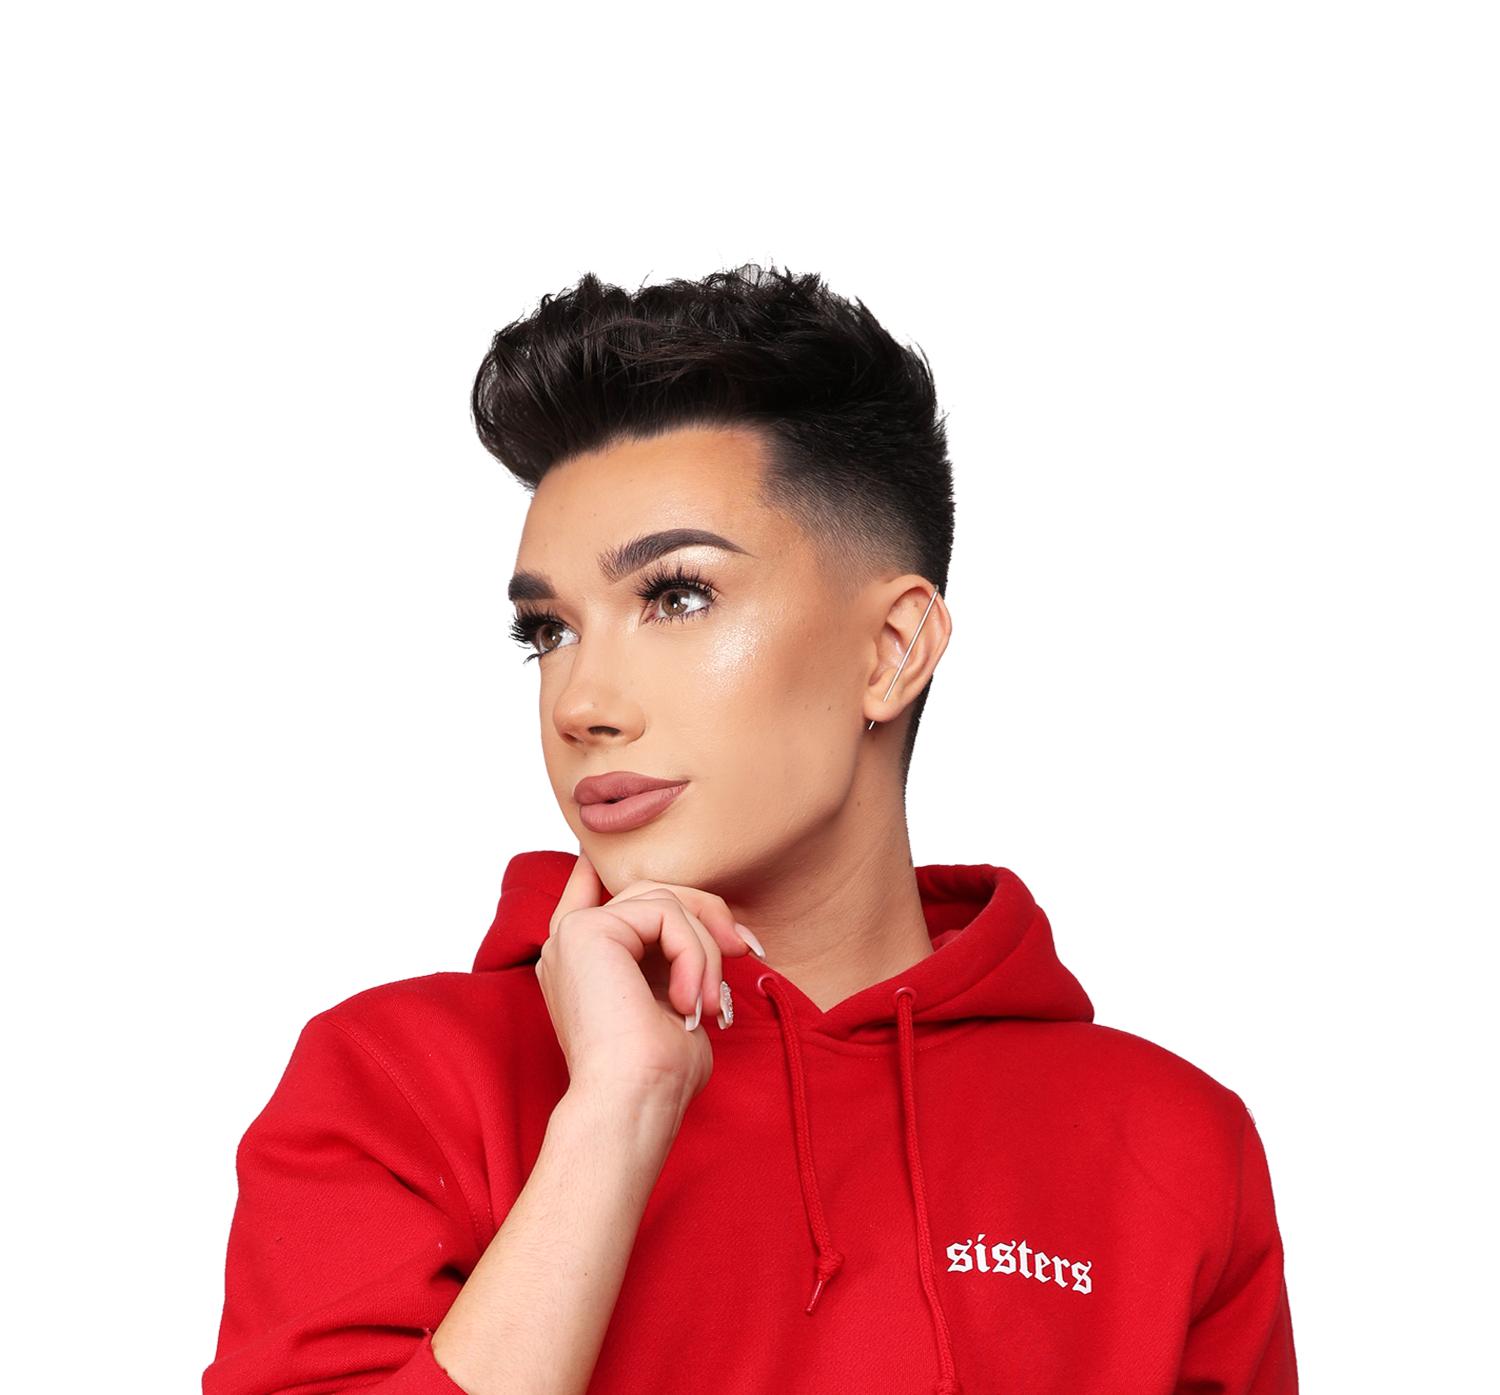 ABOUT SISTERS APPAREL – SISTERS APPAREL by JAMES CHARLES!